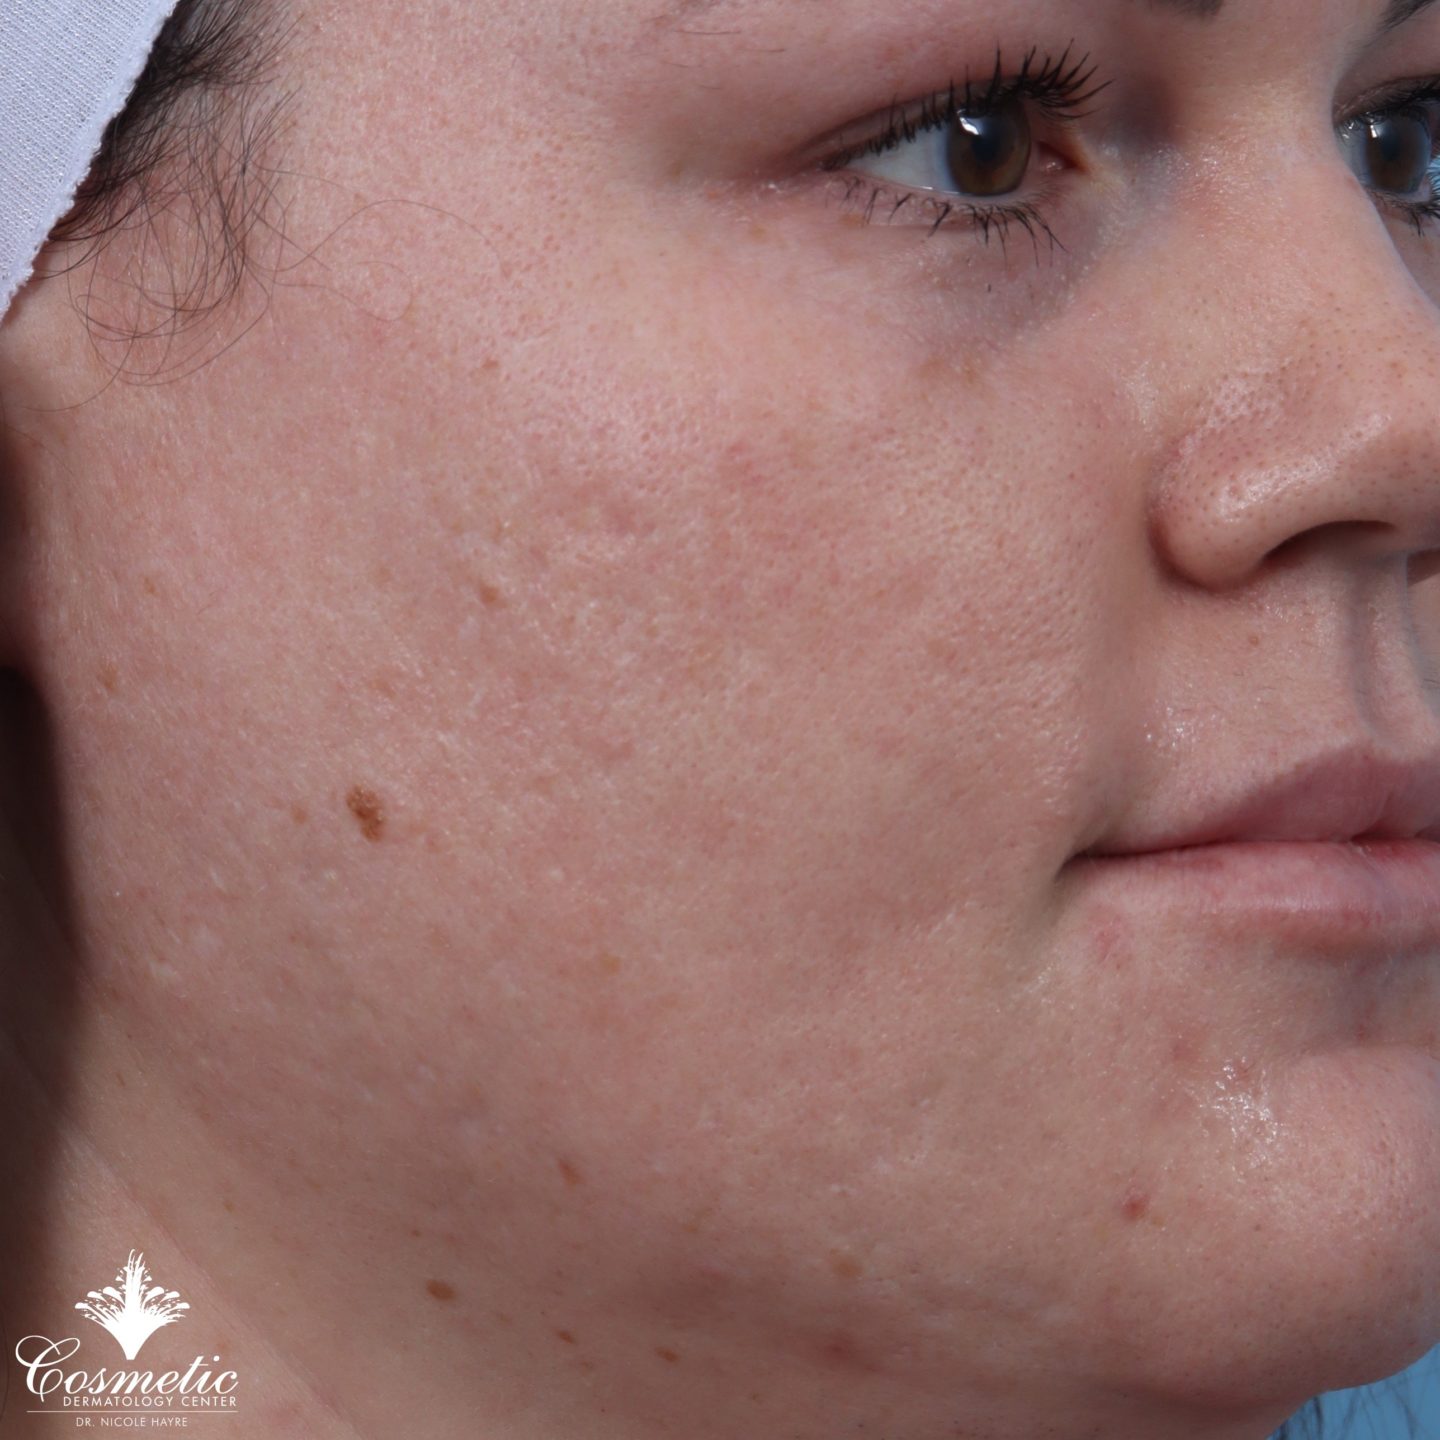 RF microneedling patient before treatment